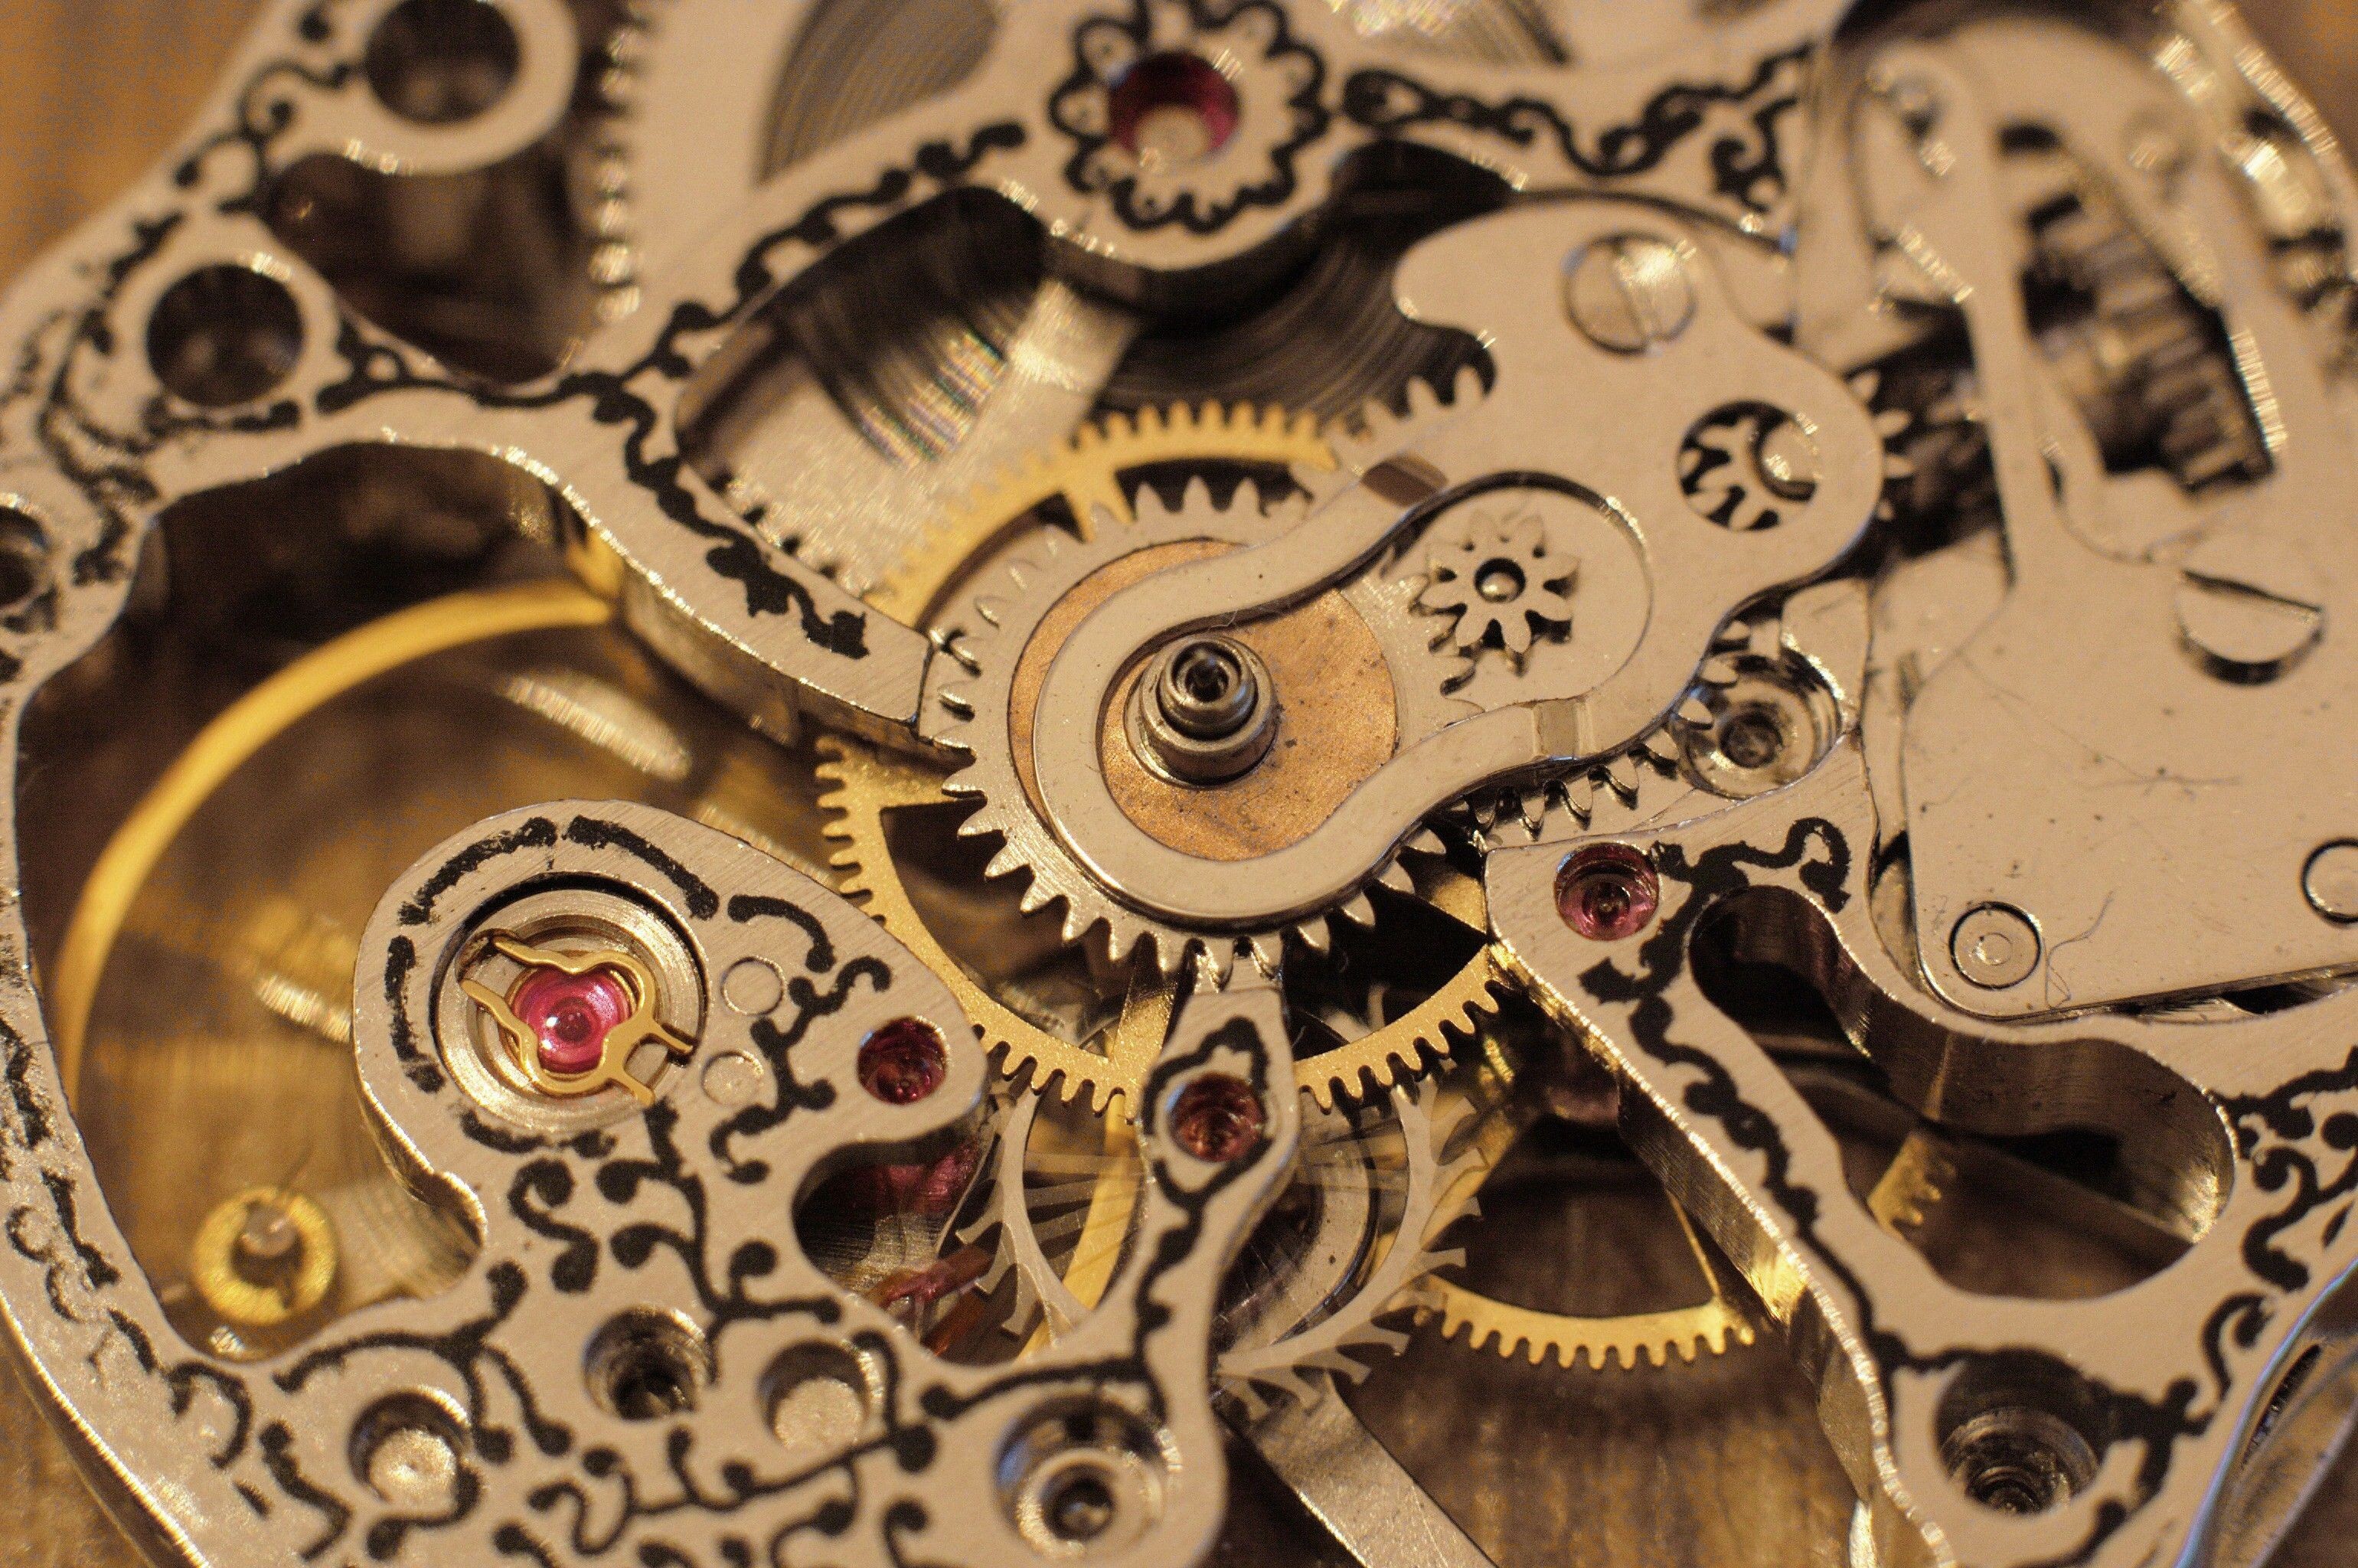 Gear: Watch, Moving parts that perform some function, A rotating circular mechanism part. 3080x2050 HD Wallpaper.